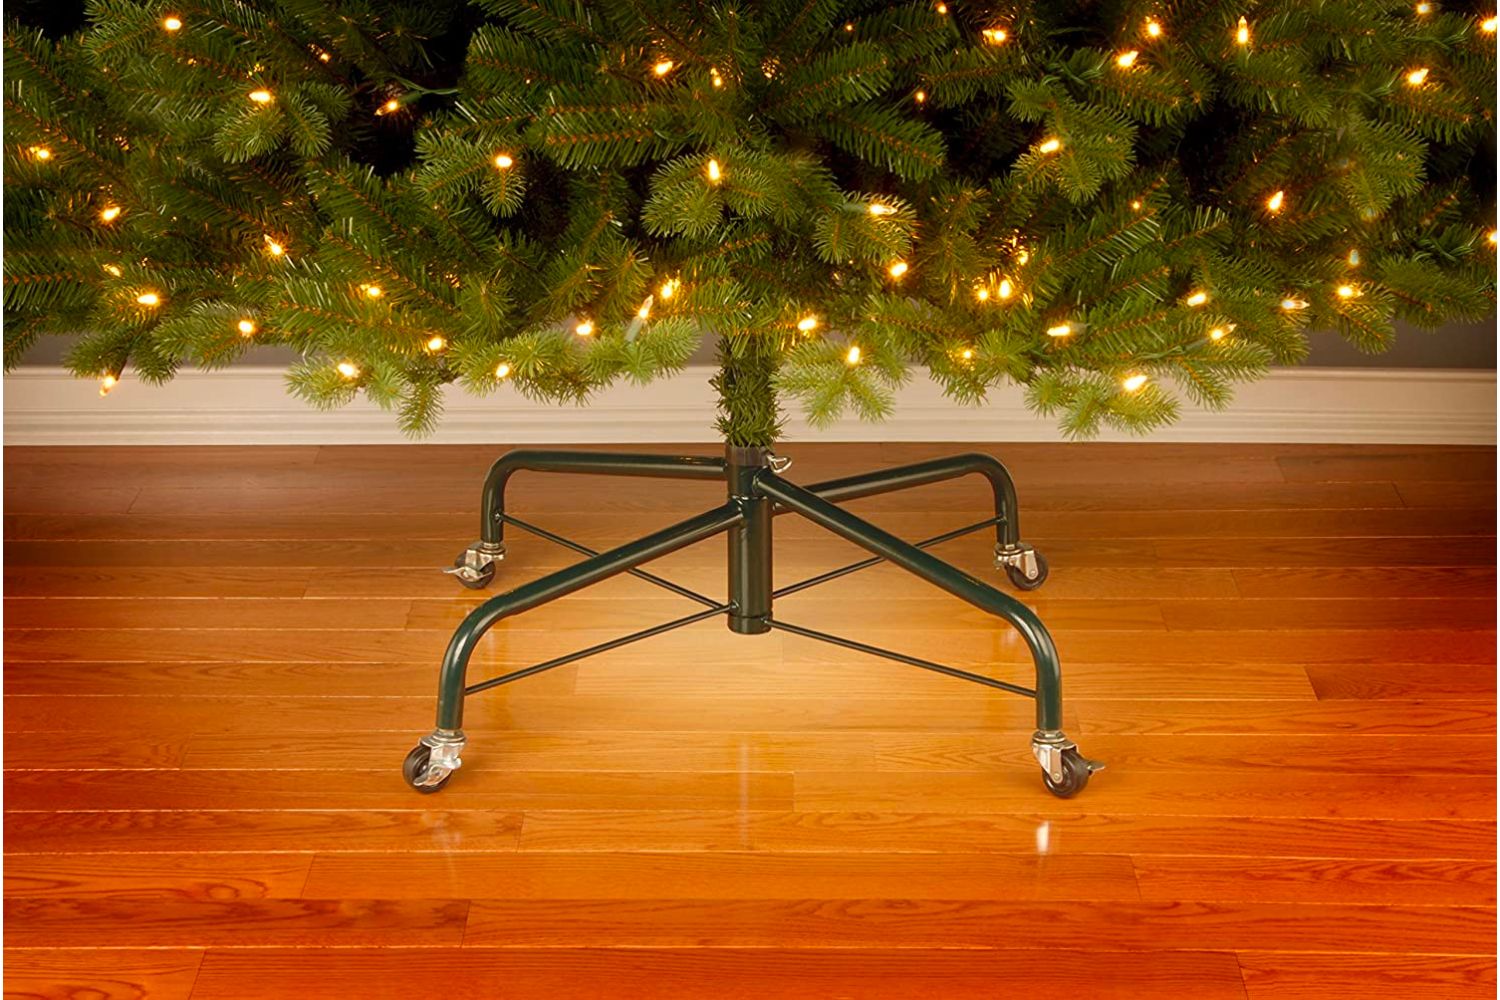 The Best Christmas Tree Stand Option supporting a Christmas tree that has gold lights.